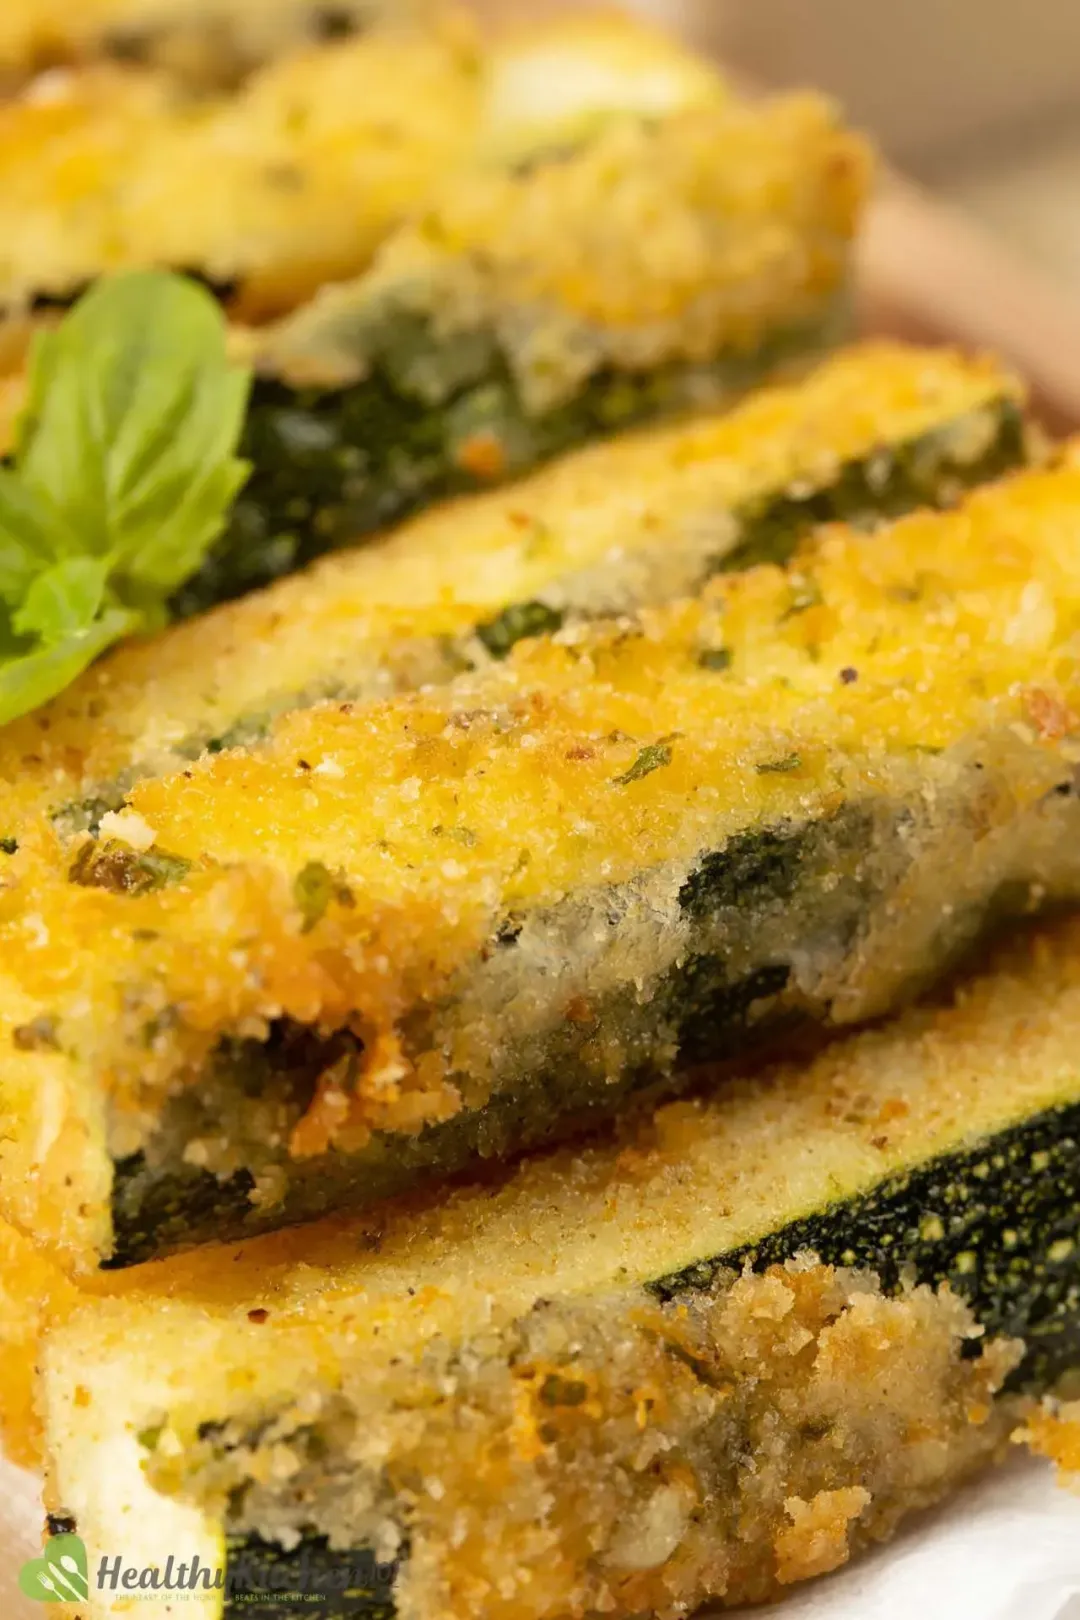 A close-up shot of zucchini fries, with a crispy breadcrumb coating